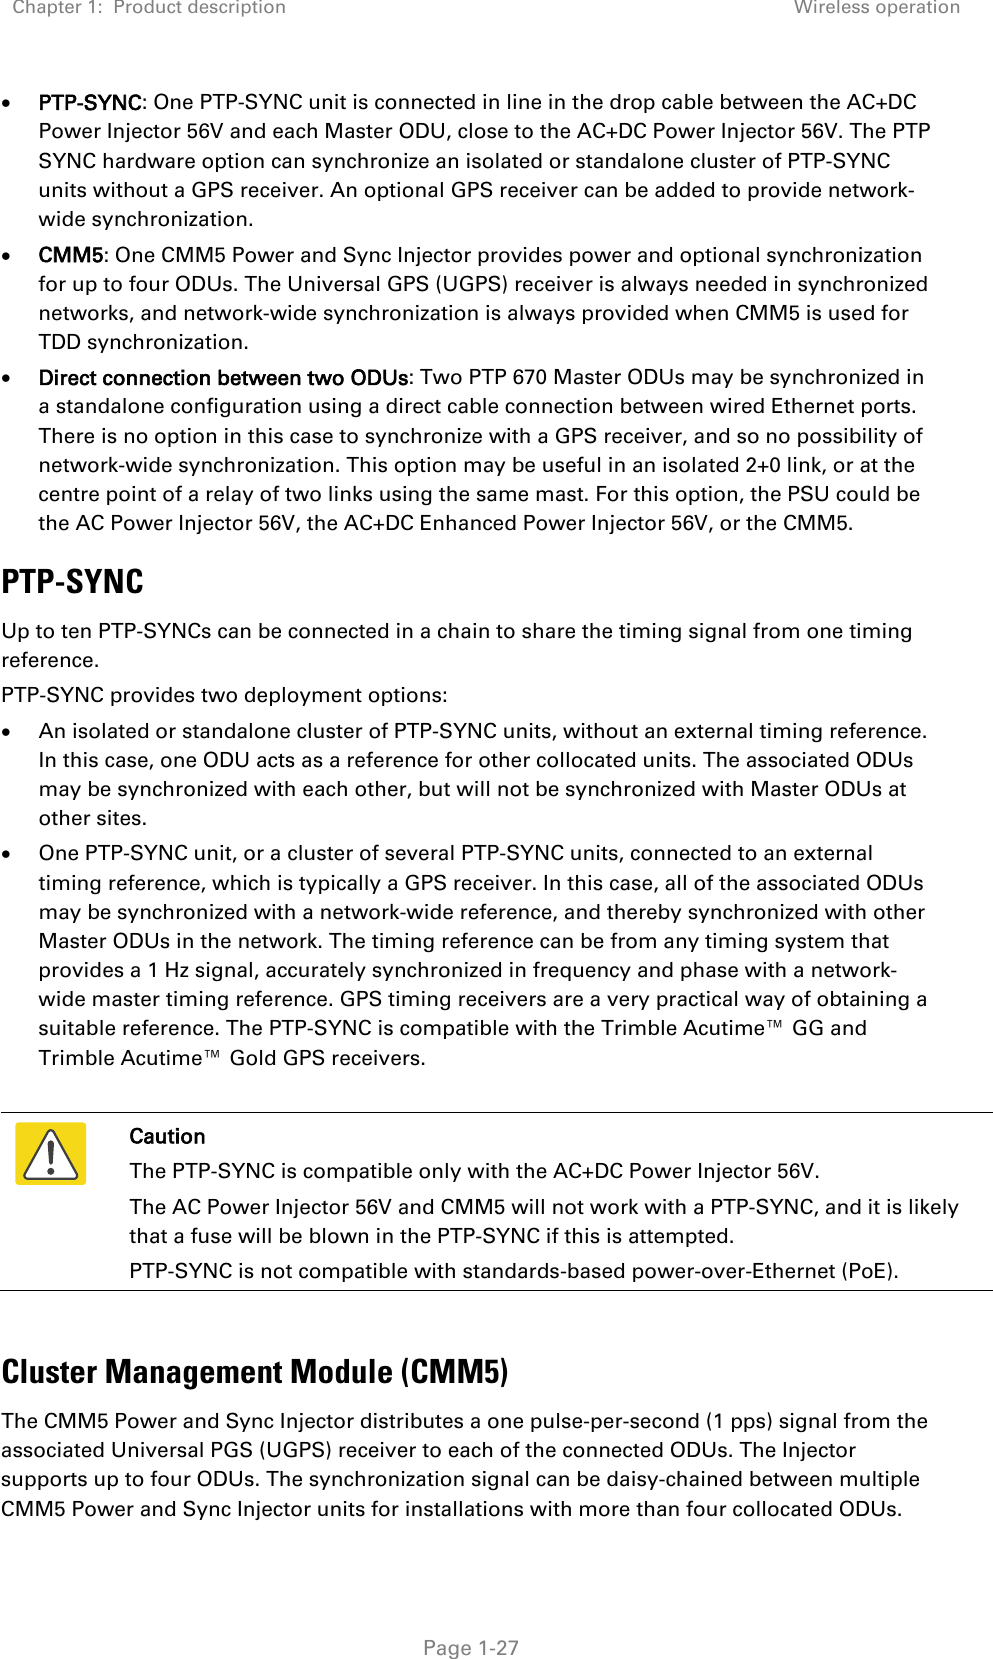 Chapter 1:  Product description  Wireless operation   Page 1-27 • PTP-SYNC: One PTP-SYNC unit is connected in line in the drop cable between the AC+DC Power Injector 56V and each Master ODU, close to the AC+DC Power Injector 56V. The PTP SYNC hardware option can synchronize an isolated or standalone cluster of PTP-SYNC units without a GPS receiver. An optional GPS receiver can be added to provide network-wide synchronization. • CMM5: One CMM5 Power and Sync Injector provides power and optional synchronization for up to four ODUs. The Universal GPS (UGPS) receiver is always needed in synchronized networks, and network-wide synchronization is always provided when CMM5 is used for TDD synchronization. • Direct connection between two ODUs: Two PTP 670 Master ODUs may be synchronized in a standalone configuration using a direct cable connection between wired Ethernet ports. There is no option in this case to synchronize with a GPS receiver, and so no possibility of network-wide synchronization. This option may be useful in an isolated 2+0 link, or at the centre point of a relay of two links using the same mast. For this option, the PSU could be the AC Power Injector 56V, the AC+DC Enhanced Power Injector 56V, or the CMM5. PTP-SYNC Up to ten PTP-SYNCs can be connected in a chain to share the timing signal from one timing reference. PTP-SYNC provides two deployment options: • An isolated or standalone cluster of PTP-SYNC units, without an external timing reference. In this case, one ODU acts as a reference for other collocated units. The associated ODUs may be synchronized with each other, but will not be synchronized with Master ODUs at other sites. • One PTP-SYNC unit, or a cluster of several PTP-SYNC units, connected to an external timing reference, which is typically a GPS receiver. In this case, all of the associated ODUs may be synchronized with a network-wide reference, and thereby synchronized with other Master ODUs in the network. The timing reference can be from any timing system that provides a 1 Hz signal, accurately synchronized in frequency and phase with a network-wide master timing reference. GPS timing receivers are a very practical way of obtaining a suitable reference. The PTP-SYNC is compatible with the Trimble Acutime™ GG and Trimble Acutime™ Gold GPS receivers.   Caution The PTP-SYNC is compatible only with the AC+DC Power Injector 56V. The AC Power Injector 56V and CMM5 will not work with a PTP-SYNC, and it is likely that a fuse will be blown in the PTP-SYNC if this is attempted. PTP-SYNC is not compatible with standards-based power-over-Ethernet (PoE).  Cluster Management Module (CMM5) The CMM5 Power and Sync Injector distributes a one pulse-per-second (1 pps) signal from the associated Universal PGS (UGPS) receiver to each of the connected ODUs. The Injector supports up to four ODUs. The synchronization signal can be daisy-chained between multiple CMM5 Power and Sync Injector units for installations with more than four collocated ODUs.  